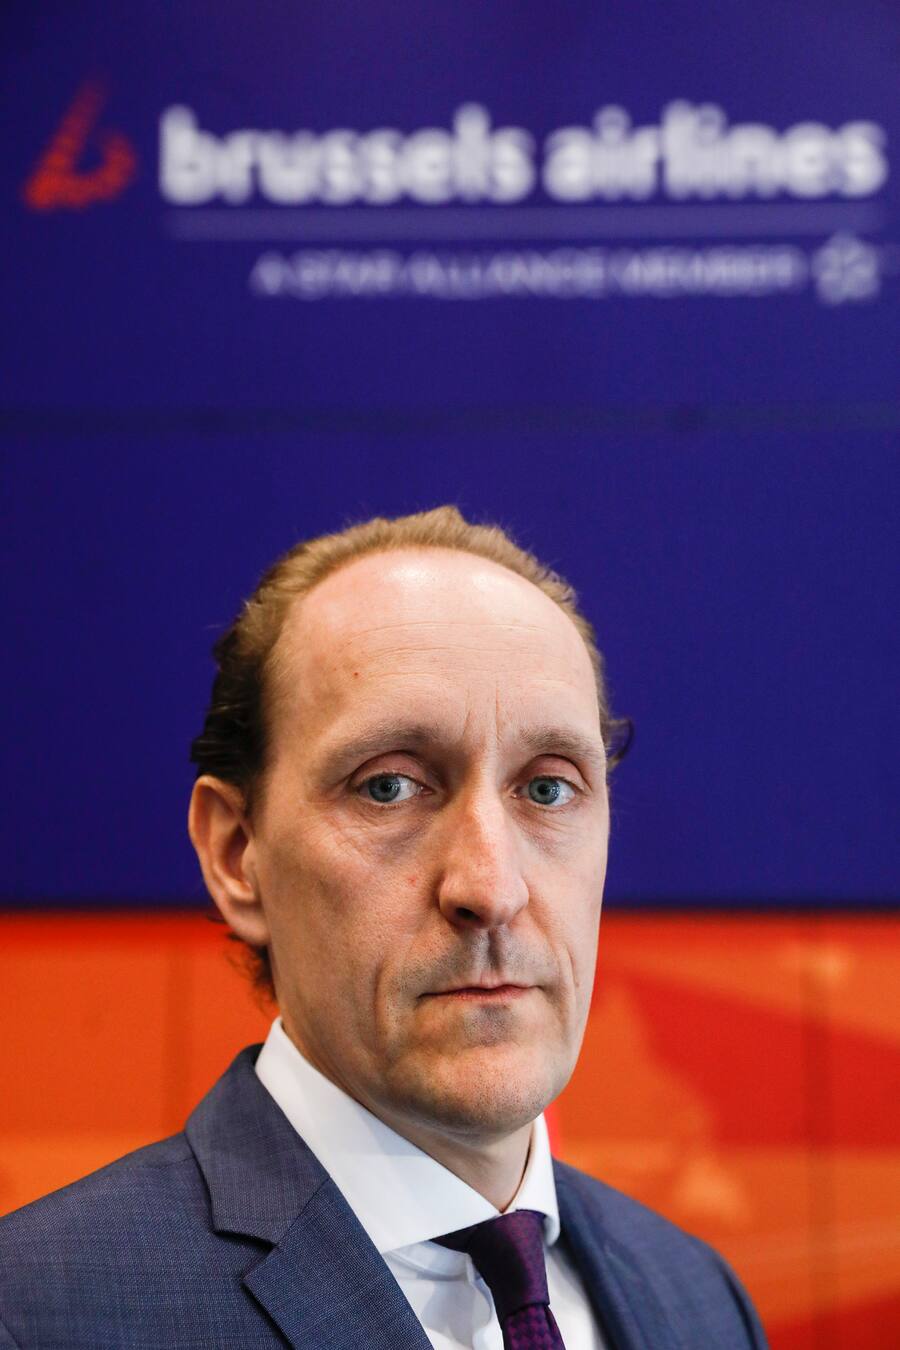 Brussels Airlines CFO Dieter Vranckx pictured after an Extraordinary Works Council of Brussels Airlines, Tuesday 12 May 2020 in Zaventem. Brussels Airlines flights are suspended till June 1st in the ongoing corona virus crisis. Staff applied for temporary unemployment. BELGA PHOTO THIERRY ROGE